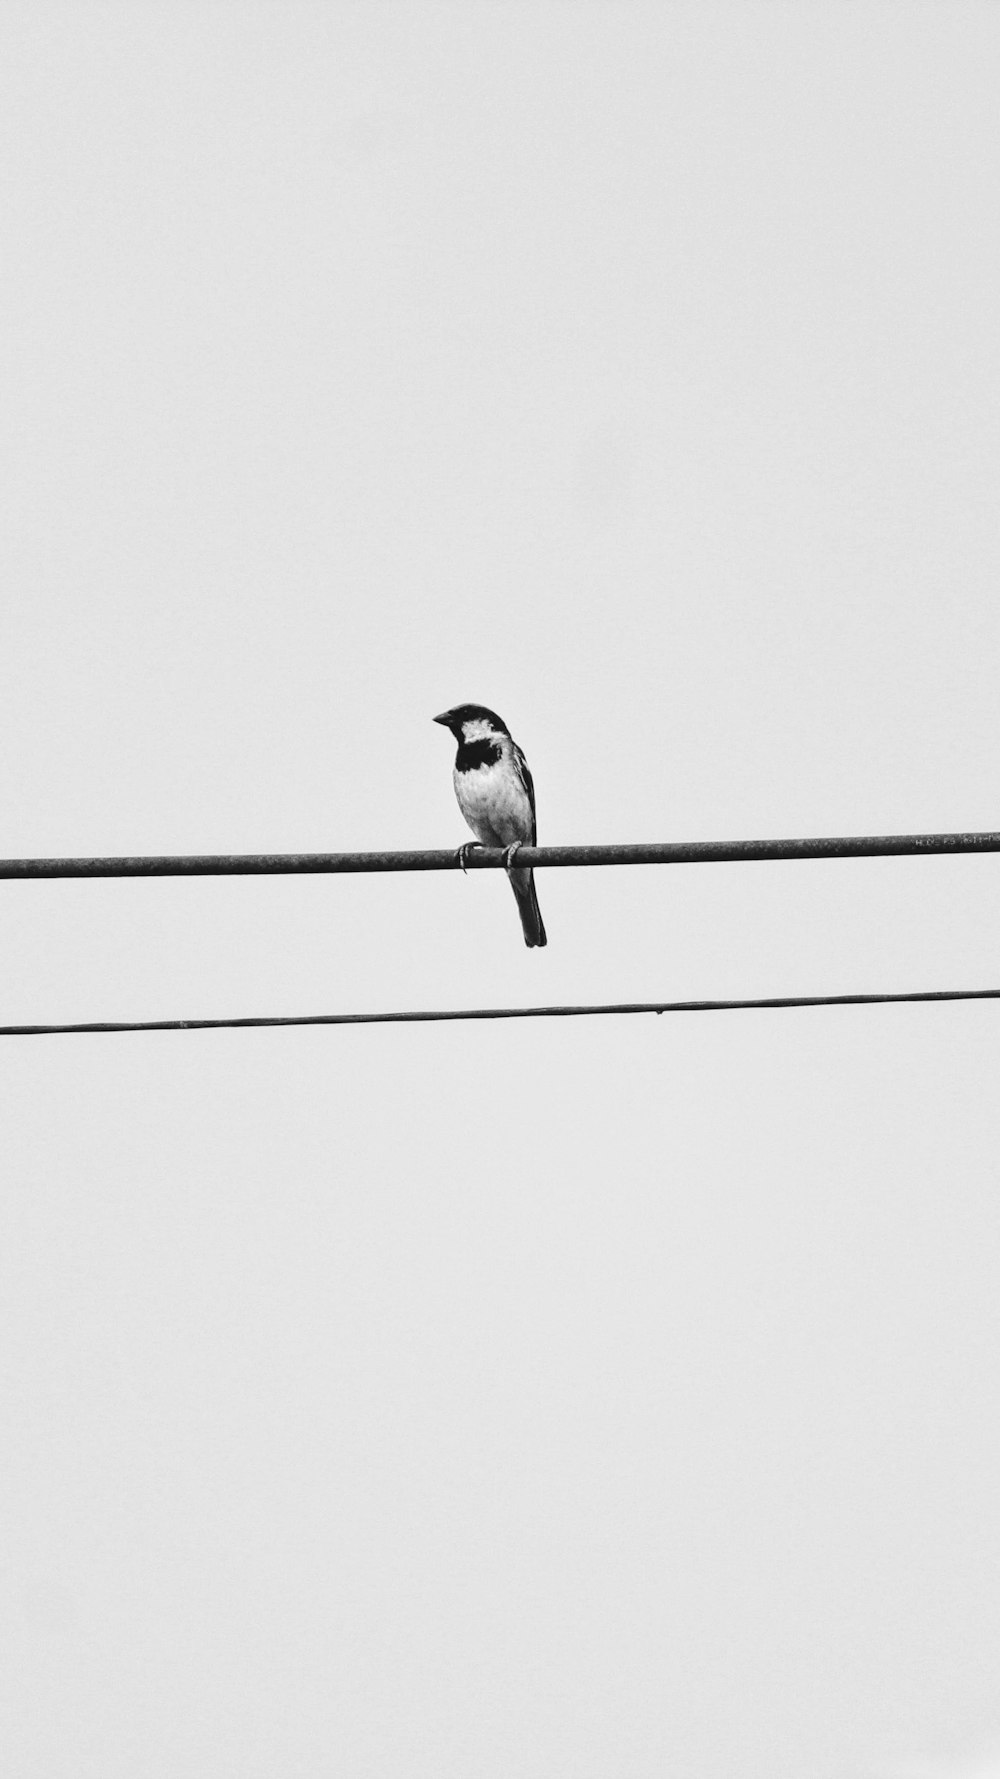 grayscale photo of a bird on a wire